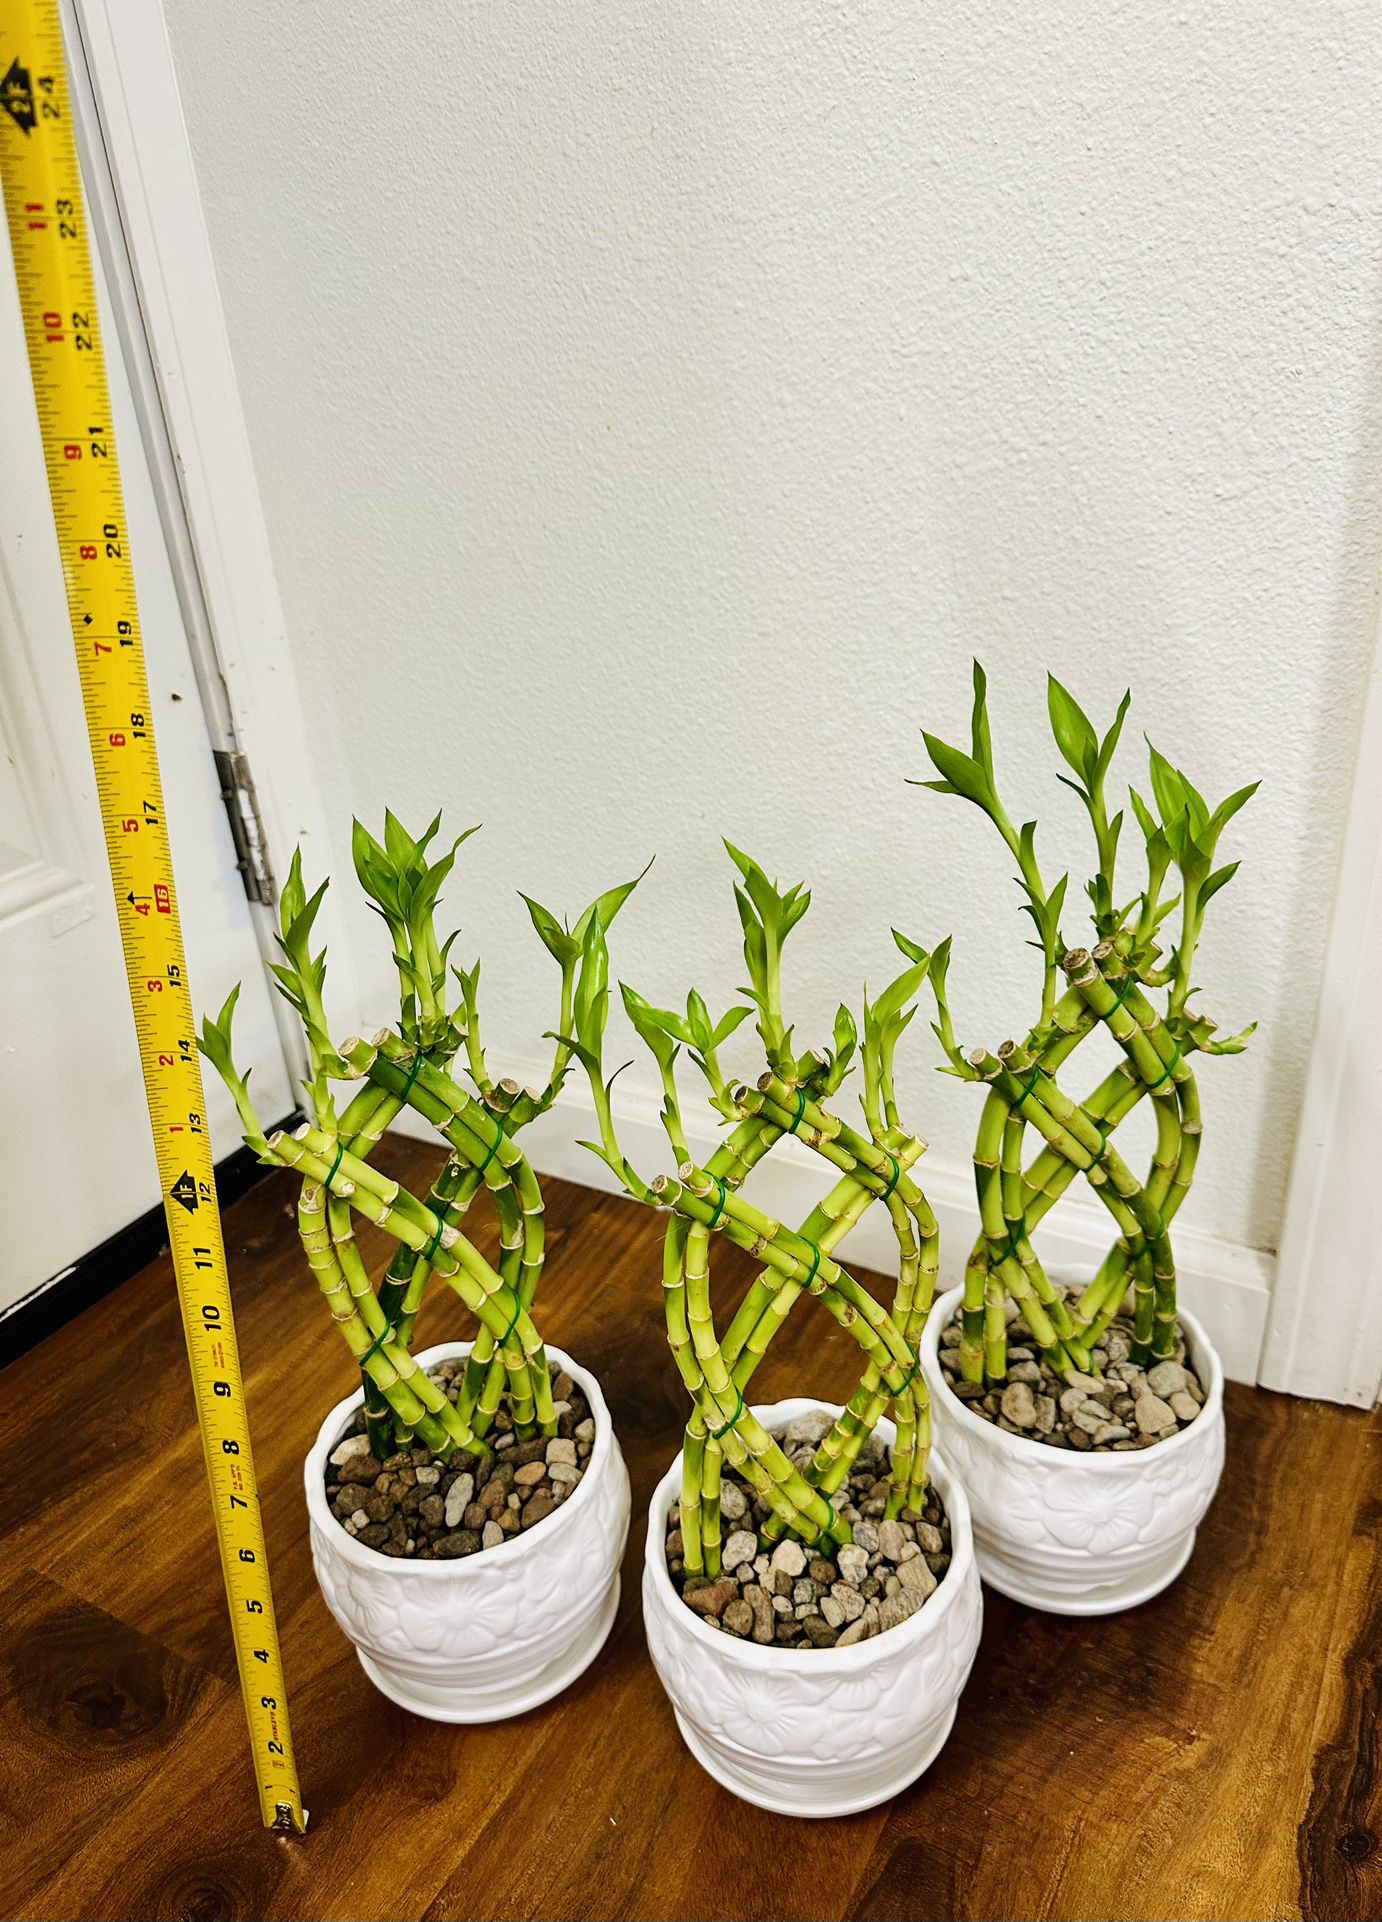 Trellis Lucky Bamboo Live Indoor Plant In Ceramic Pot $10/each 